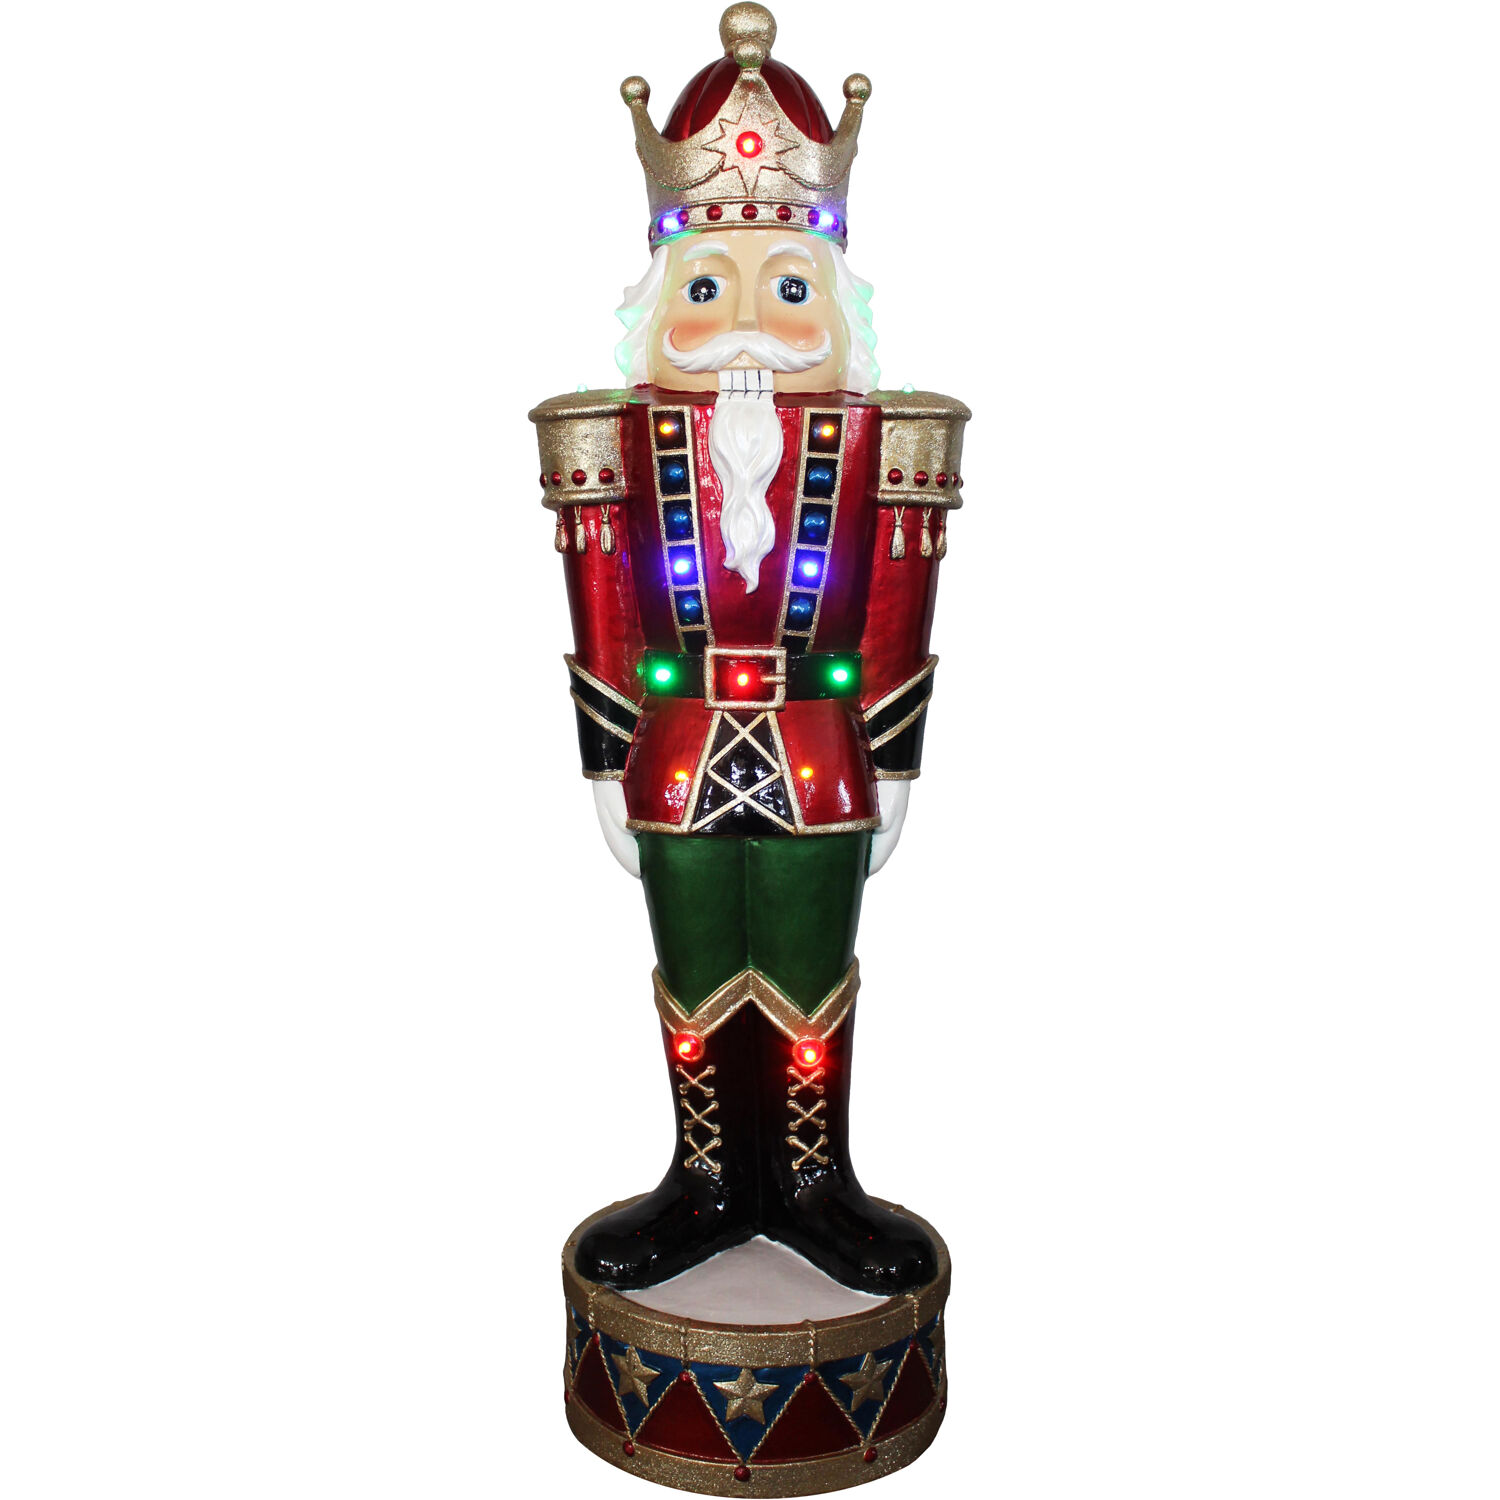 Fraser Hill Farm Indoor/Covered Outdoor Christmas Decorations, 3-Ft. Resin Nutcracker Greeter with LED Lights - image 1 of 5